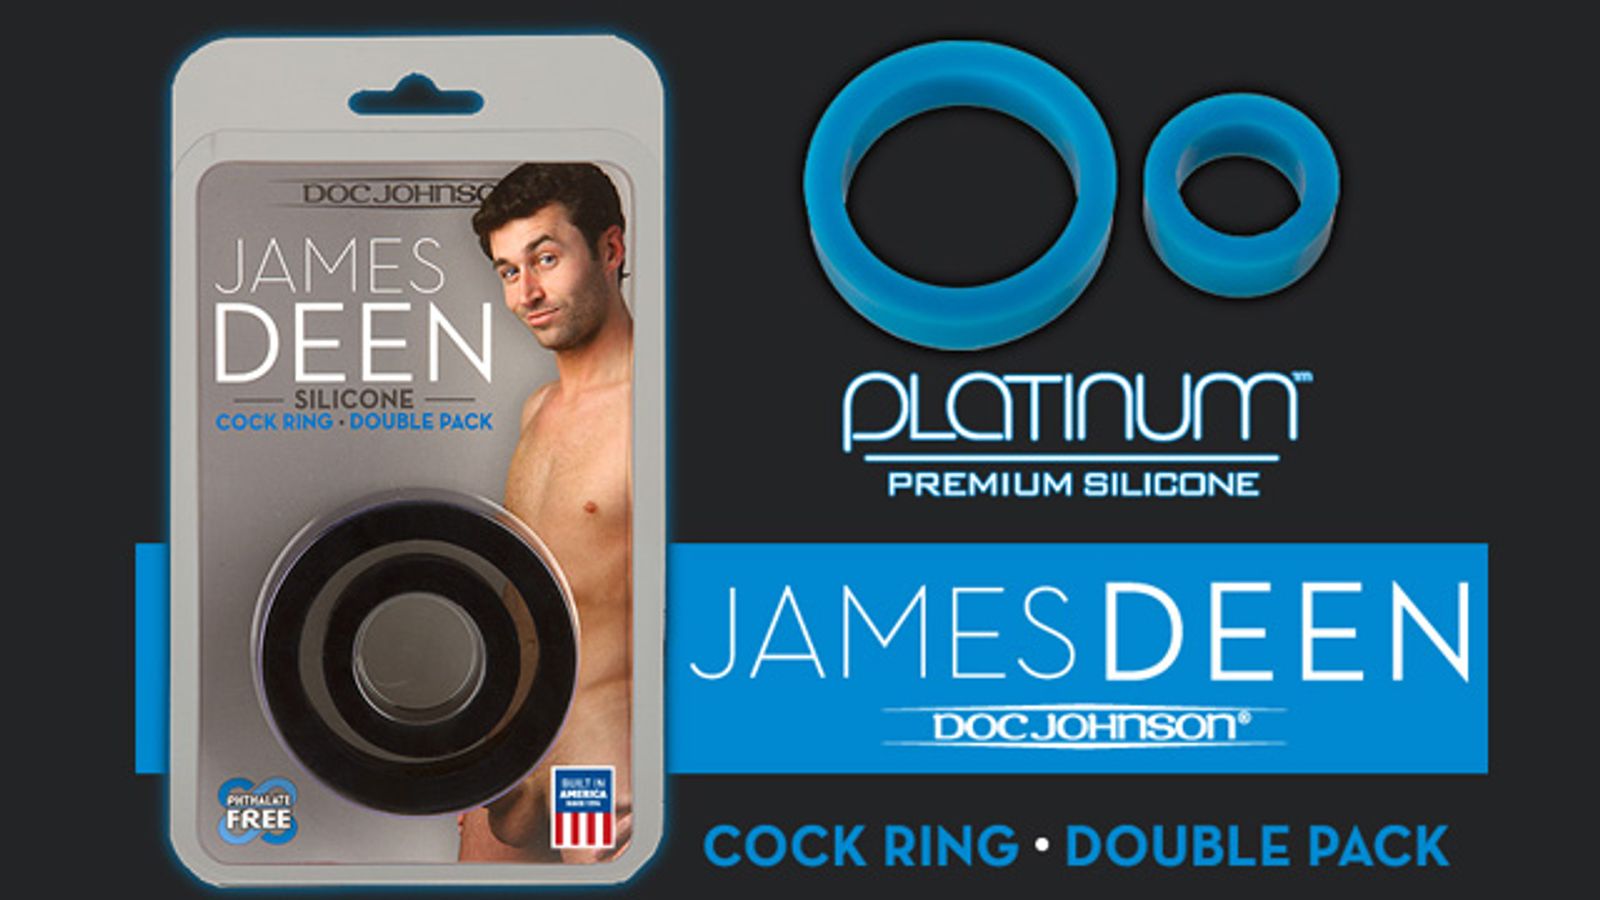 Doc Johnson Releases James Deen Signature Cock Ring